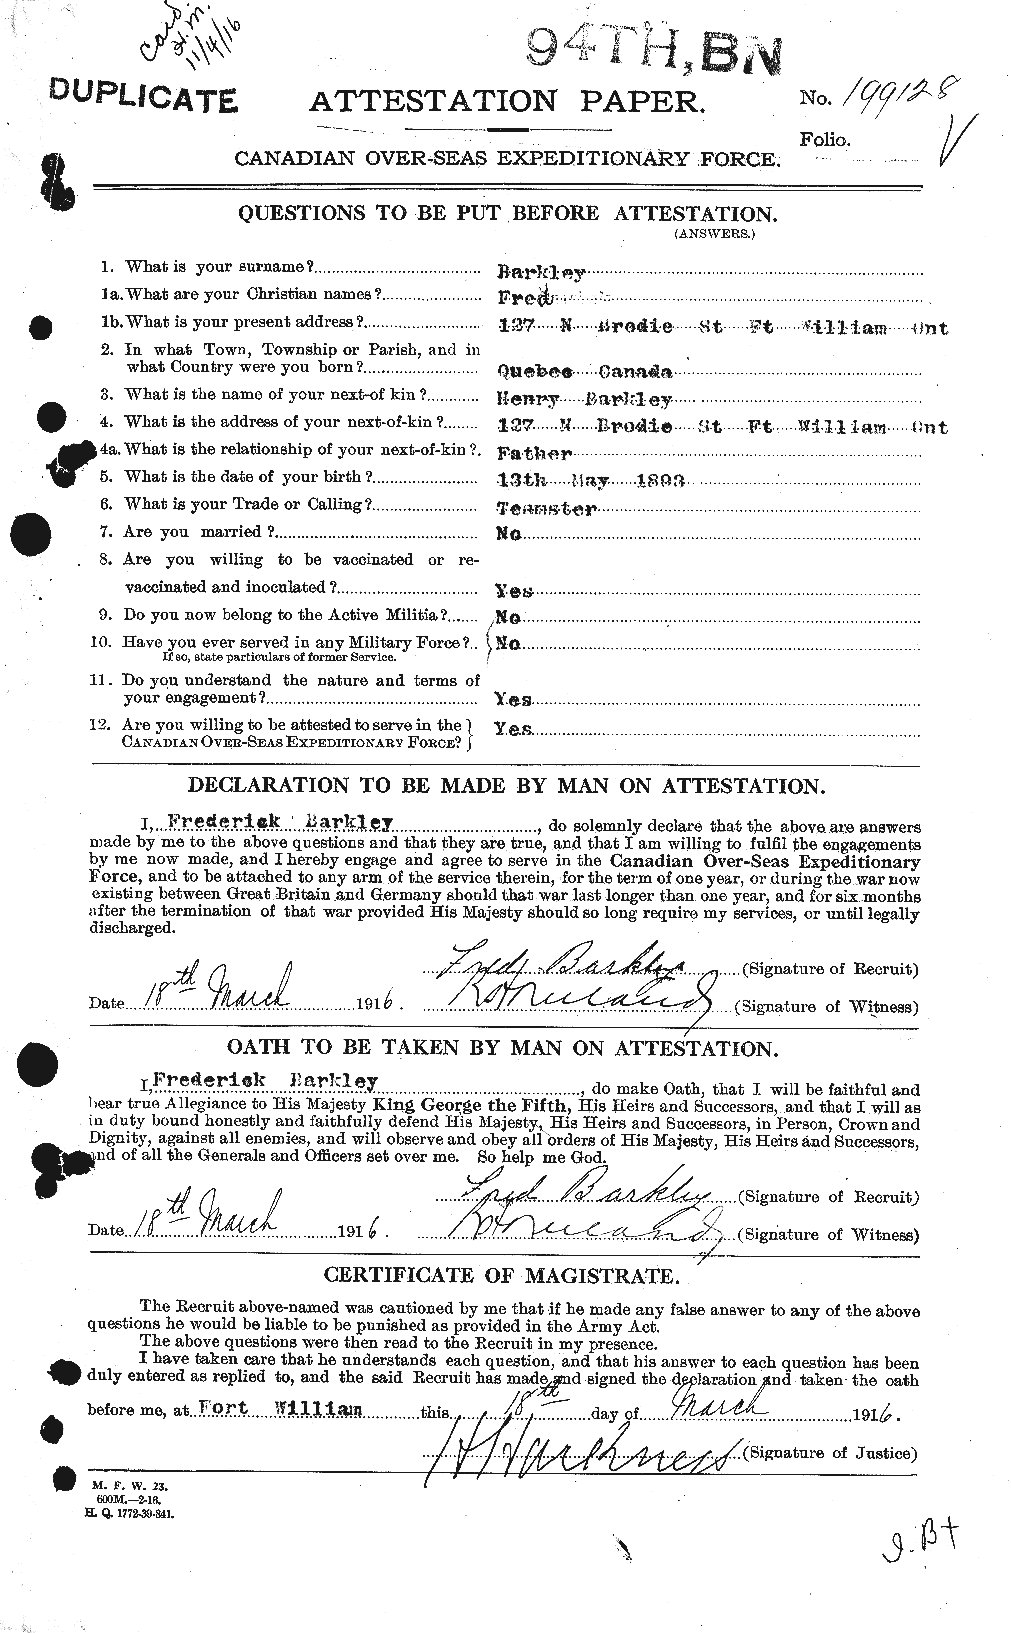 Personnel Records of the First World War - CEF 226838a